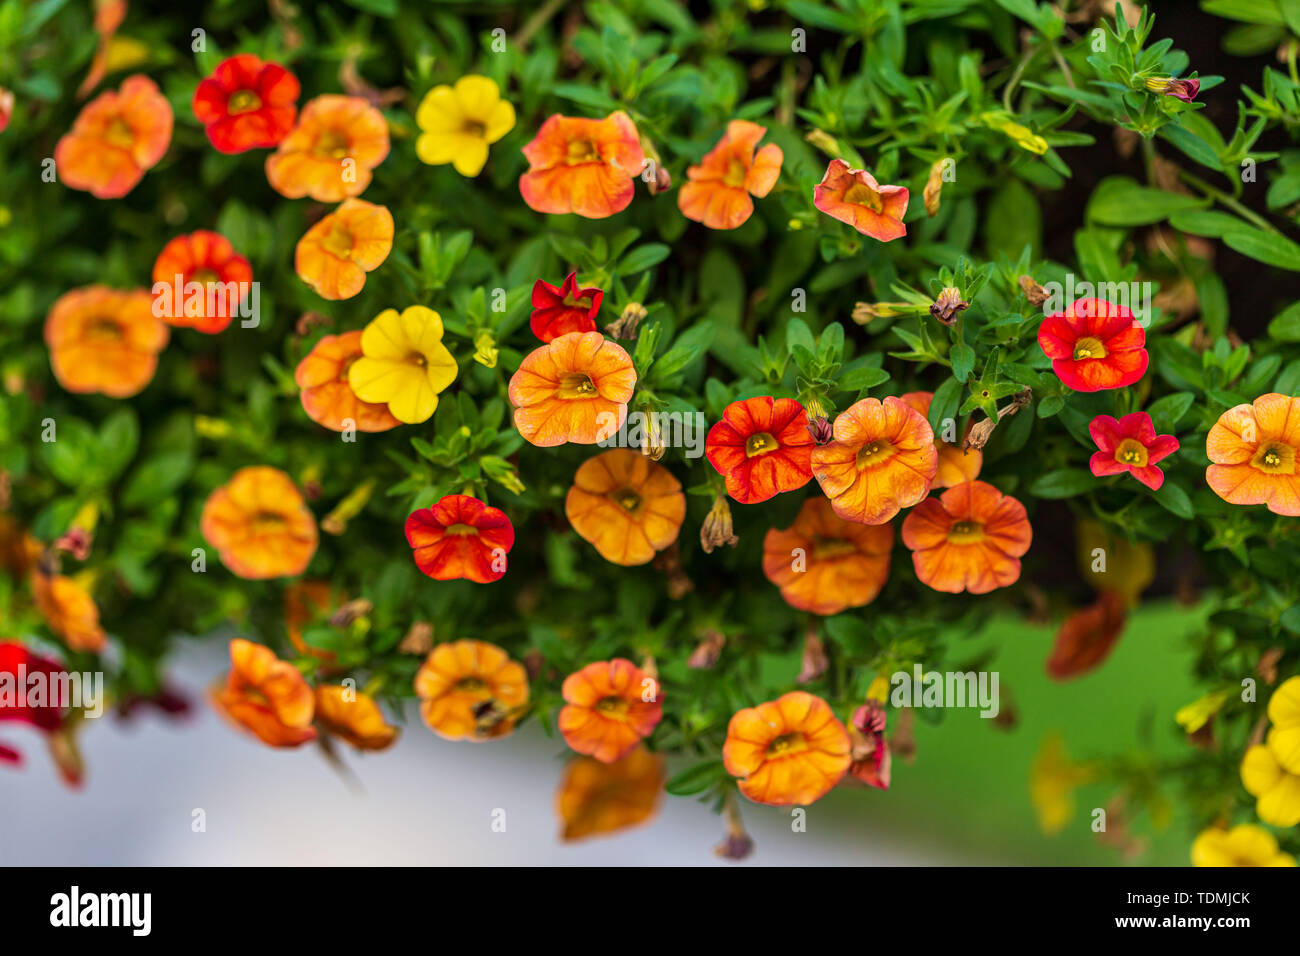 a close up of a hanging basket of million bells flowers Stock Photo